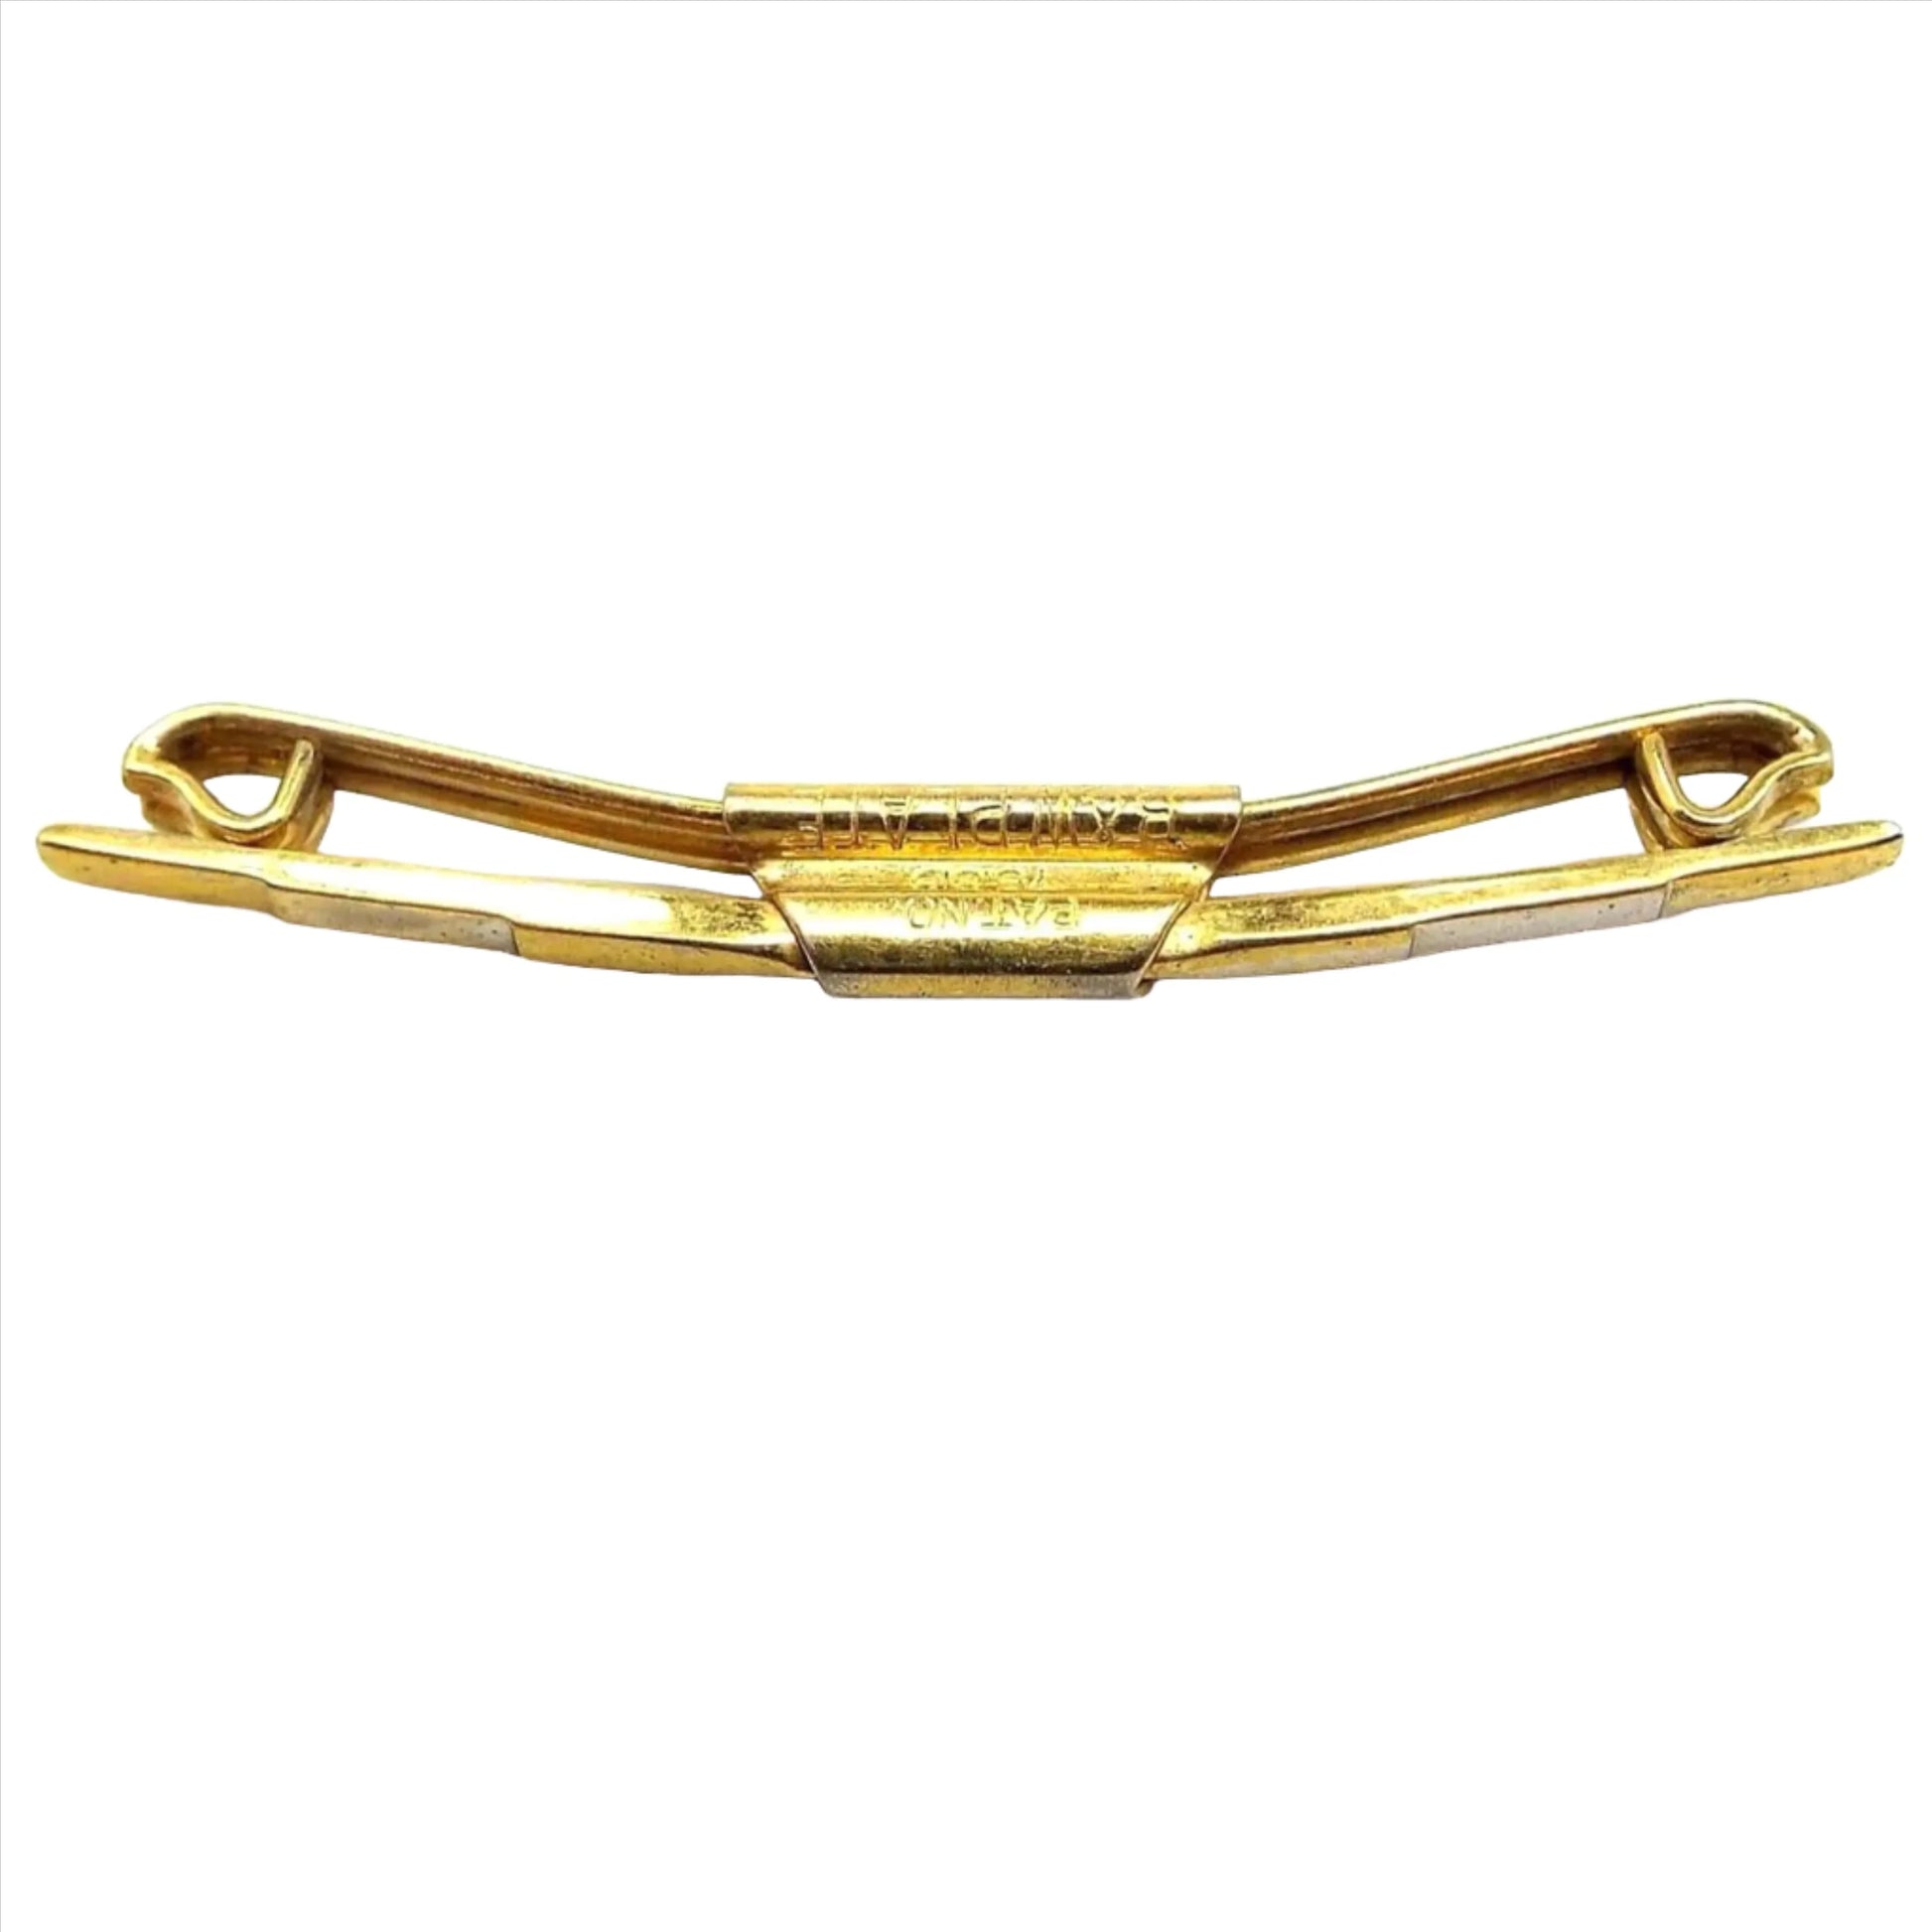 Front and side view of the 1920's Art Deco vintage Swank collar clip bar. The metal is gold tone in color. The front bar has a step like design on the front where each area is raised more until you get to the middle. The back bar has ends that are curled inwards. Stamped on the side is Pat. No 75818 B&W plate.